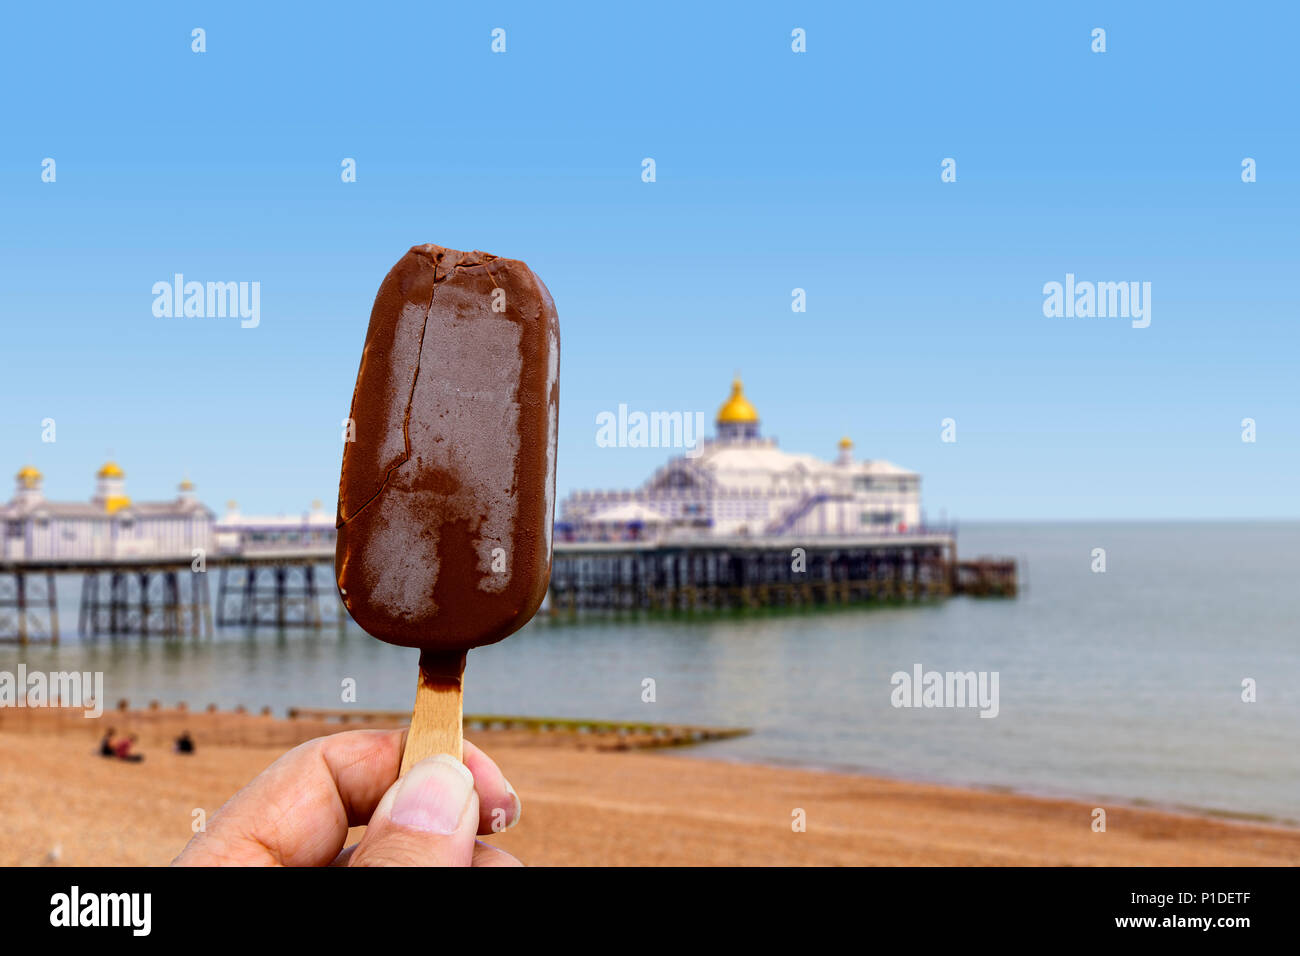 Hand holding a choc ice lolly at the seaside Stock Photo